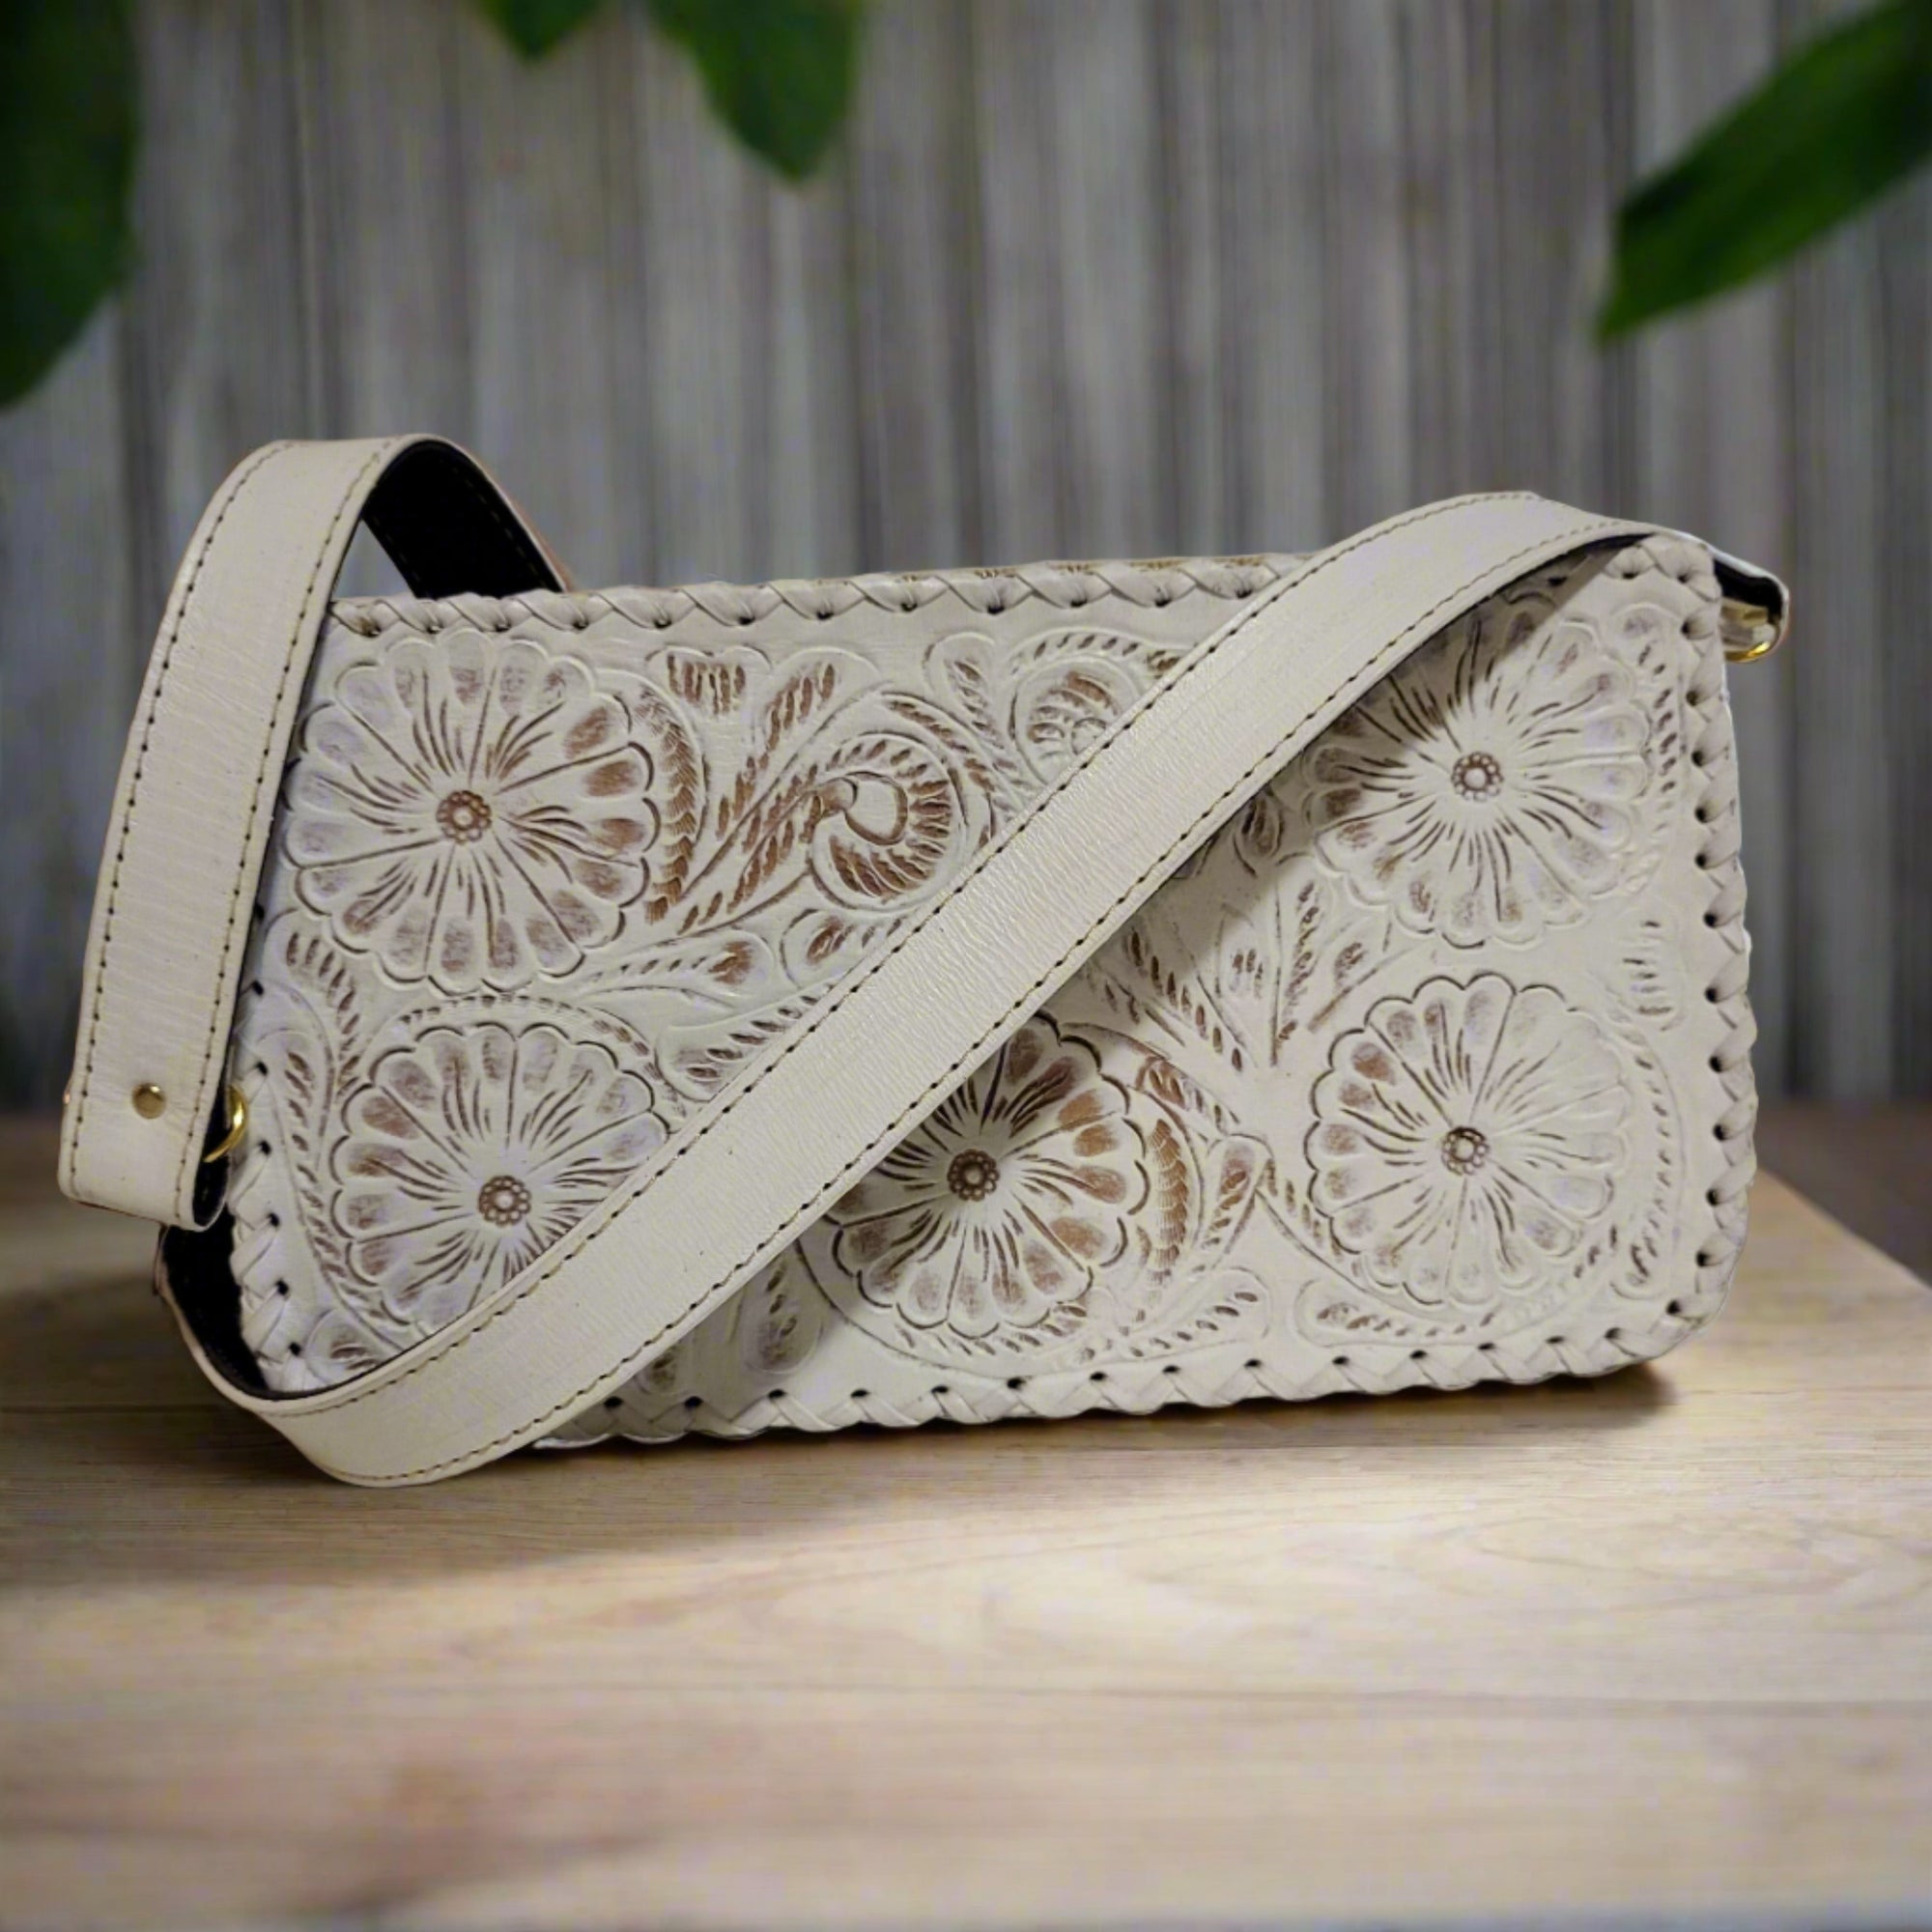 Hand tooled leather bag for women, small shoulder leather bag, white leather bag